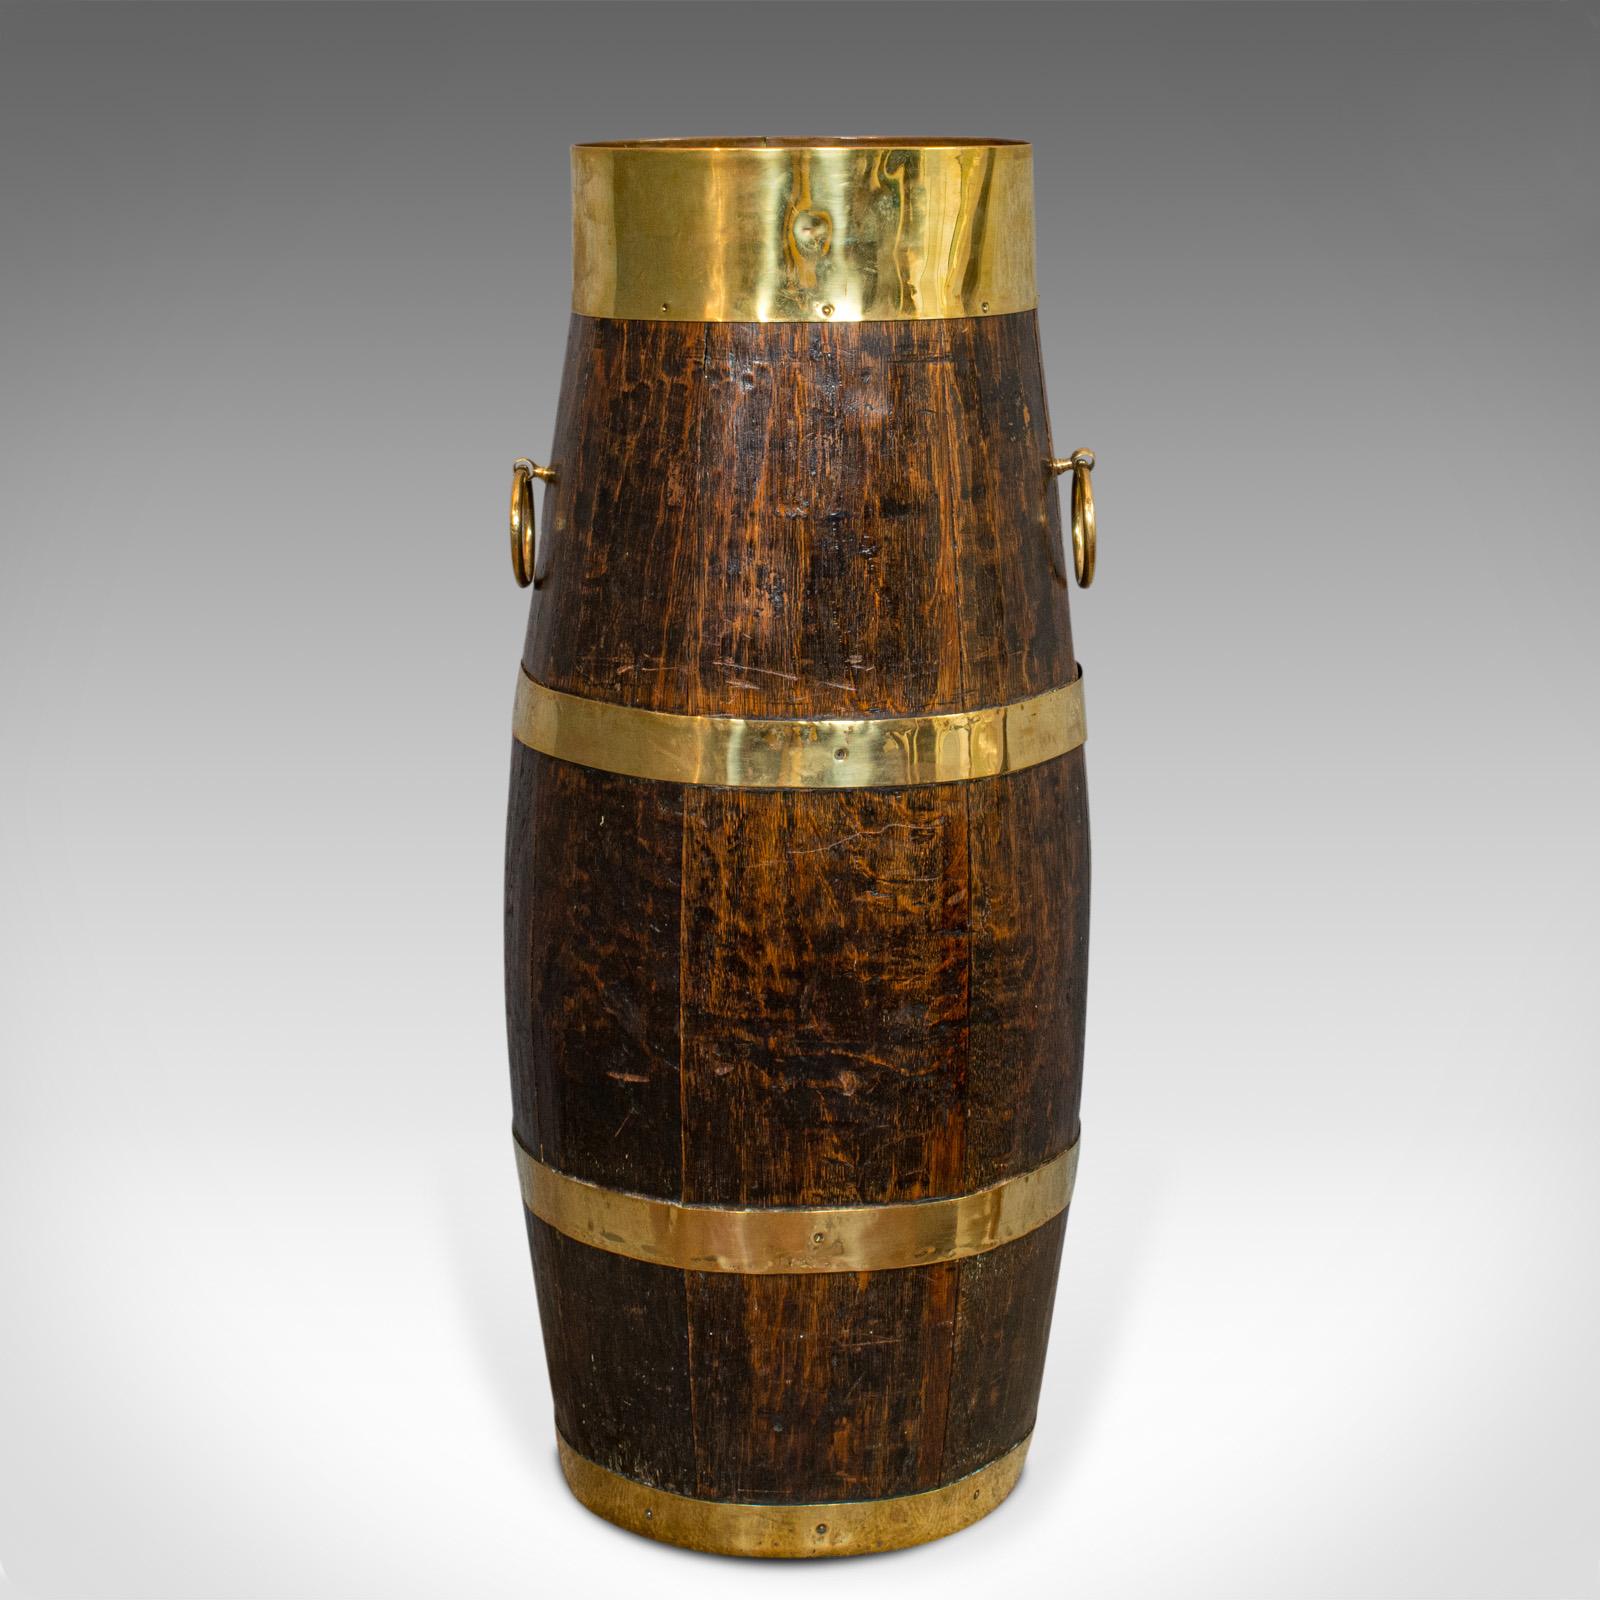 This is a vintage coopered barrel. An English, oak and brass Art Deco stick or umbrella Stand, dating to the early 20th century, circa 1930.

Delightful country inn charm
Displays a desirable aged patina
Rich oak with fine grain interest and